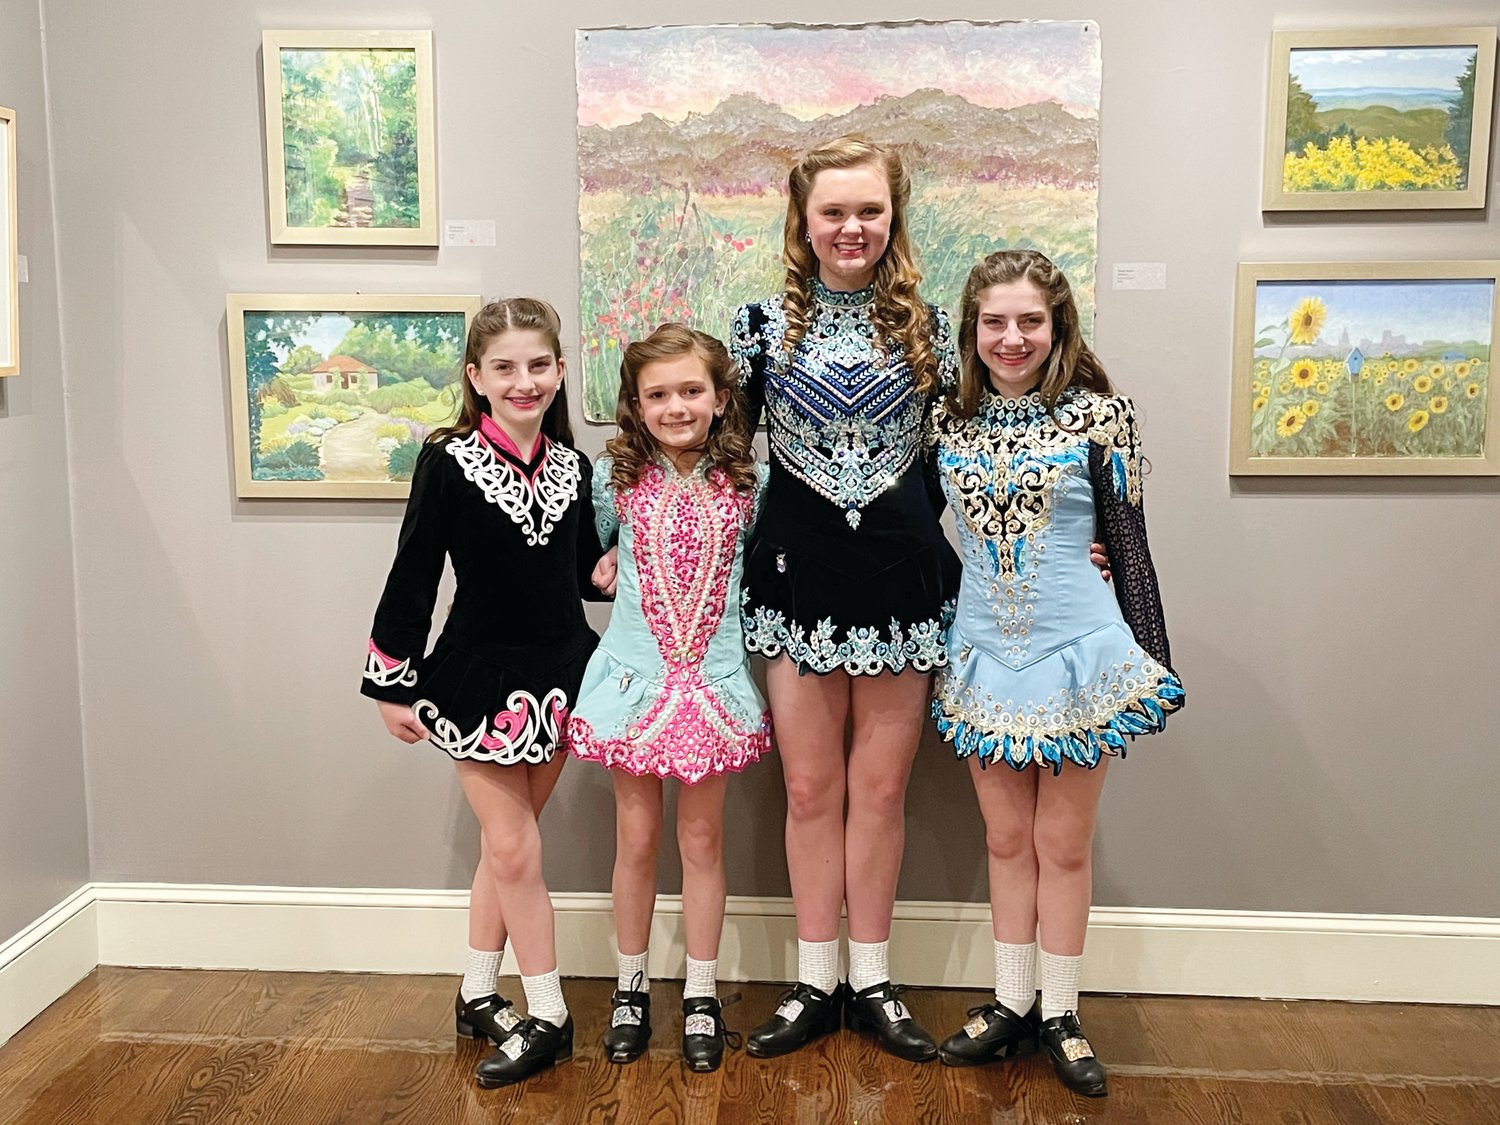 JUMPING BACK INTO PERFORMANCES: (From left to right) Moira Dadekian, Bridget Peterson, Maggie Peterson and Brigid Dadekian from the Kelly School of Irish Dance perform at the Providence Art Club this past February. This was their first in-person show since the start of the pandemic.